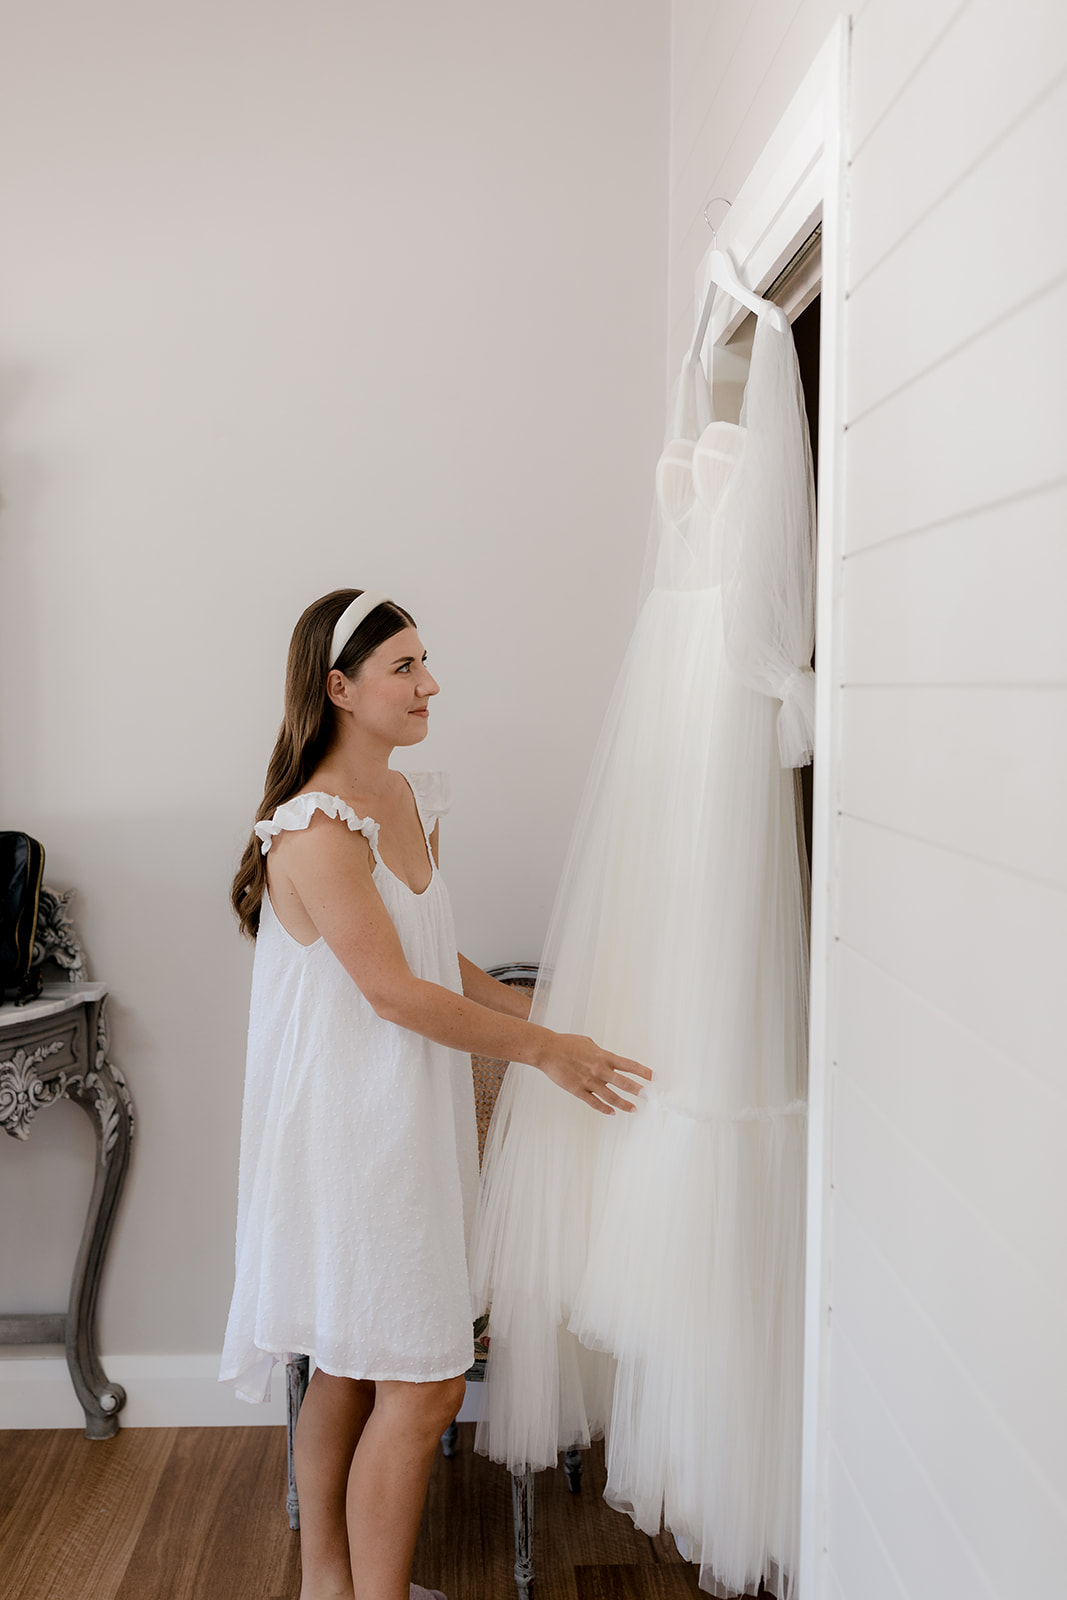 Bride getting ready for her elegant country wedding.